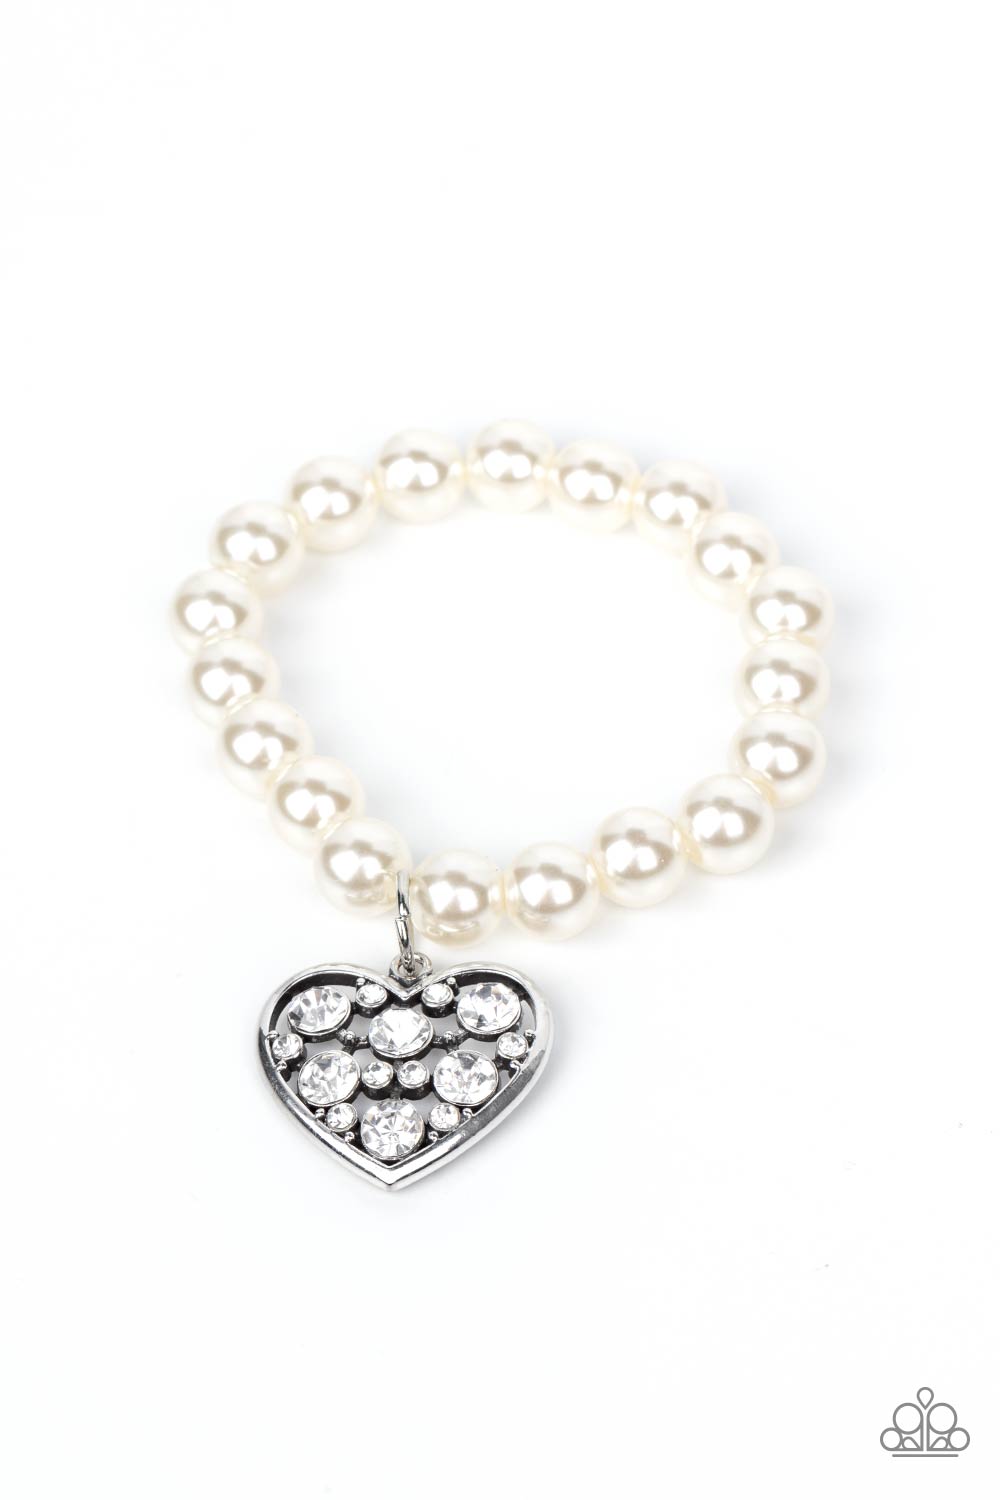 Cutely Crushing White Pearl Bracelet - Paparazzi Accessories  A dramatically oversized white rhinestone encrusted silver heart charm dangles from a stretchy strand of bubbly white pearls, creating a flirtatious dazzle.  All Paparazzi Accessories are lead free and nickel free!  Sold as one individual bracelet.